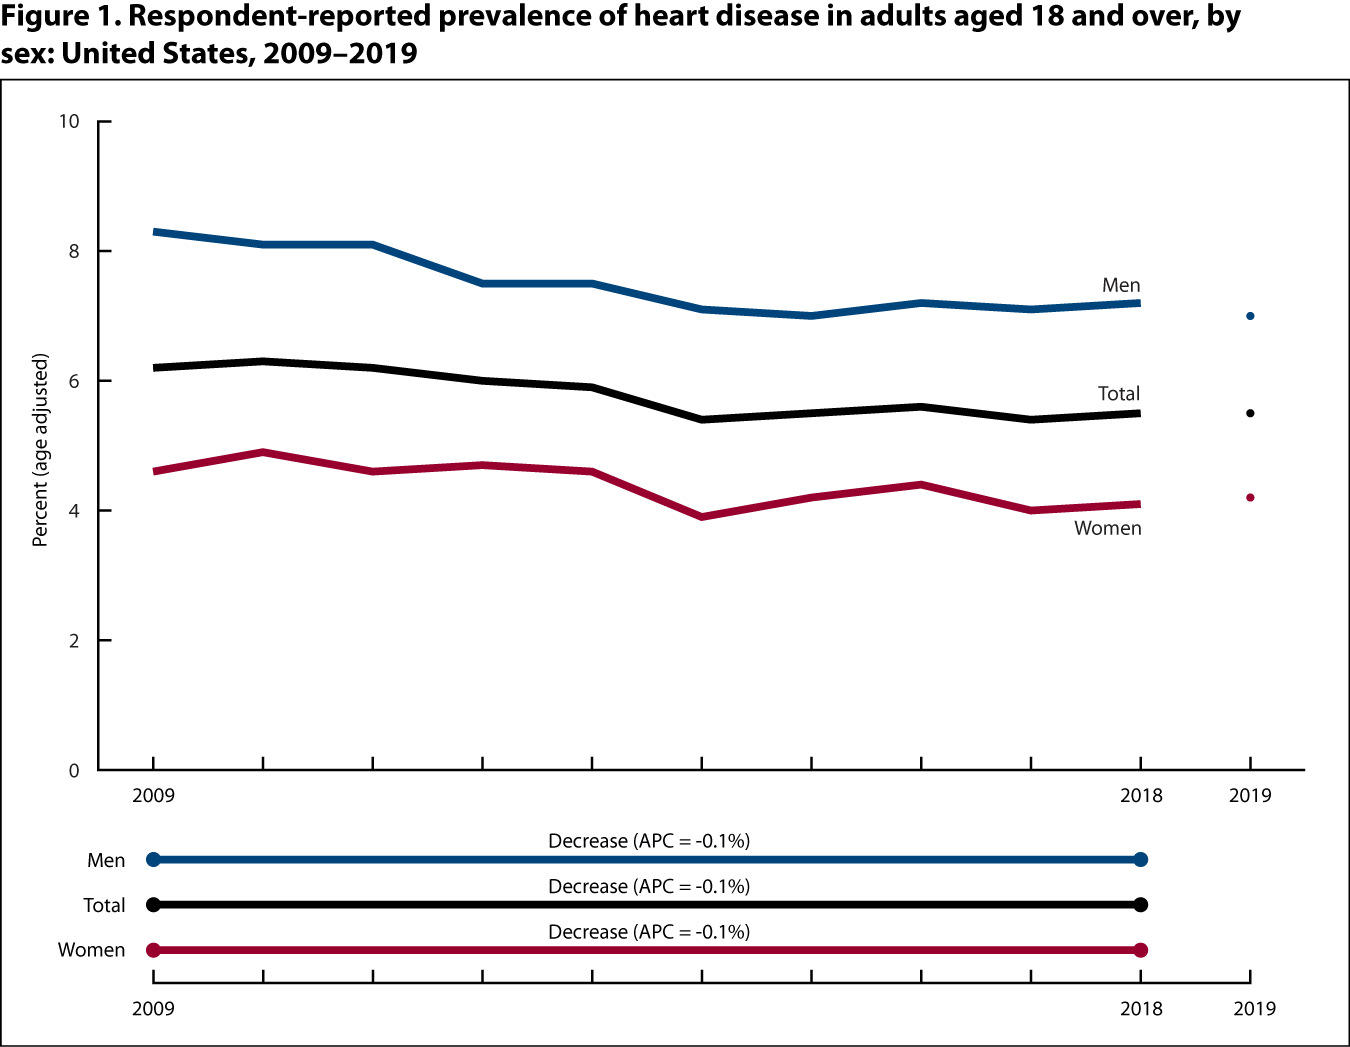 Figure 1 is a line graph showing the percentage of respondent-reported heart disease among adults aged 18 and over, by sex for 2009 through 2018 and at 2019 (point).